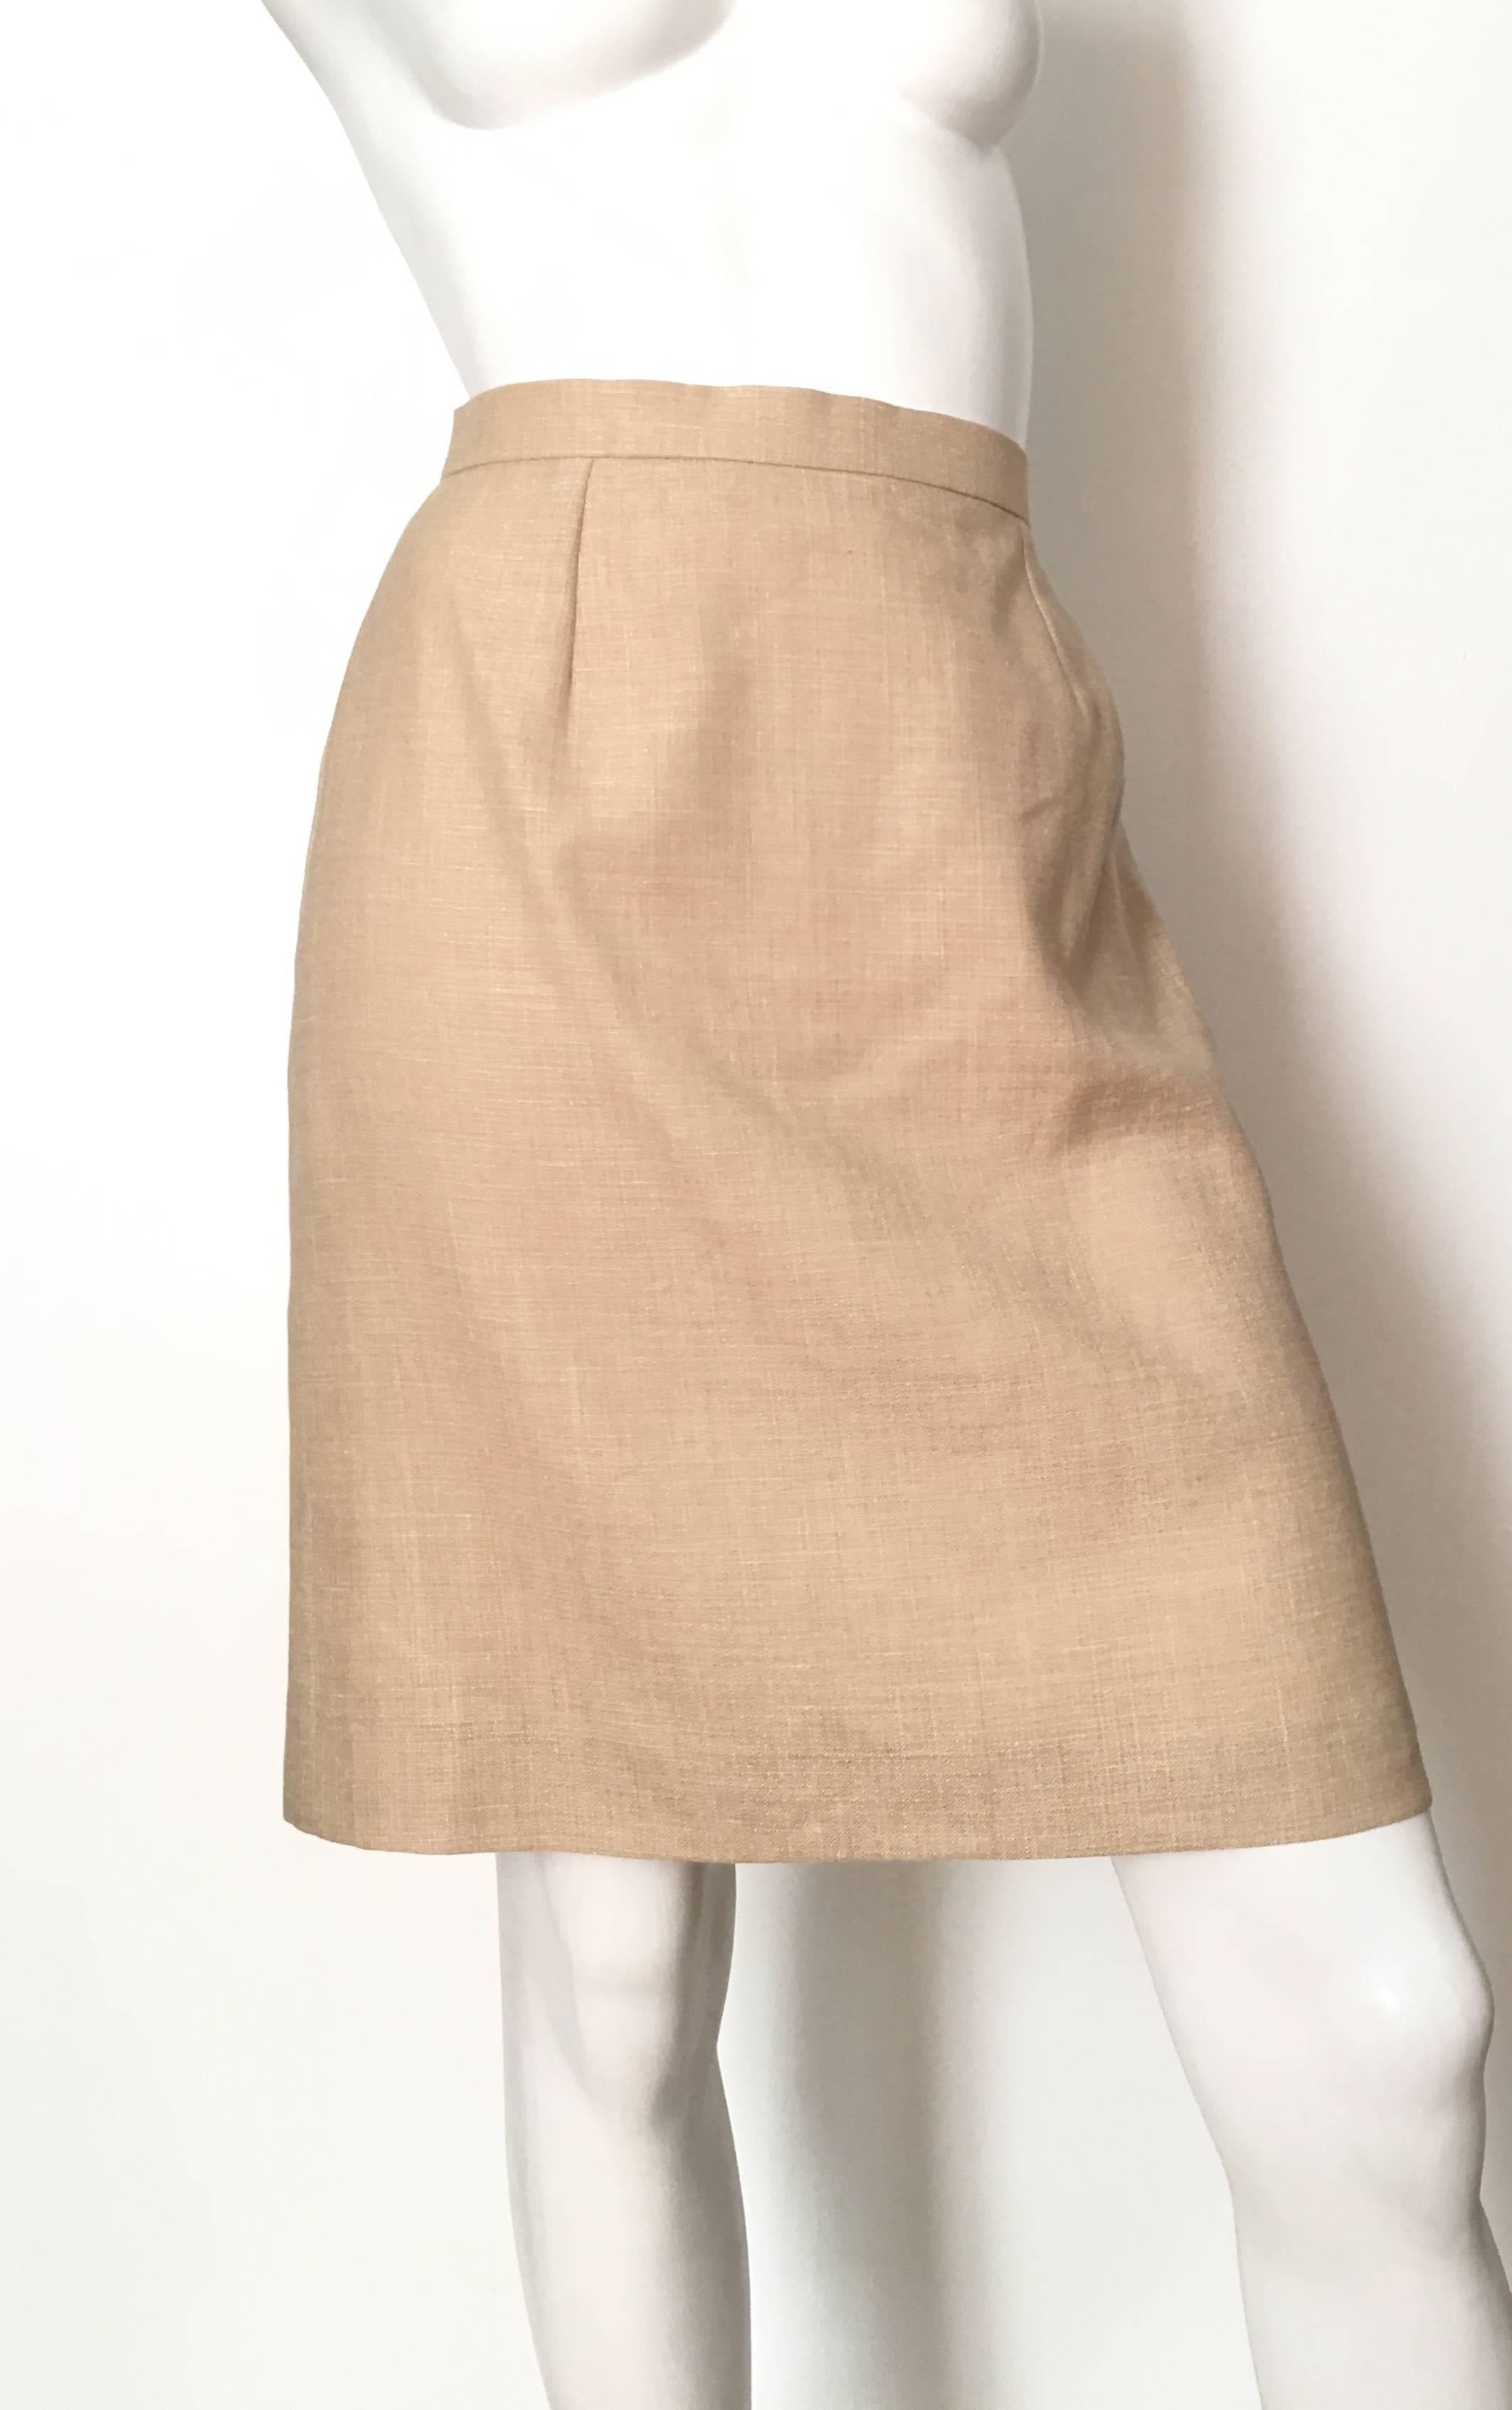 Givenchy Couture 1990s Tan Jacket & Skirt Set Size 6. 4